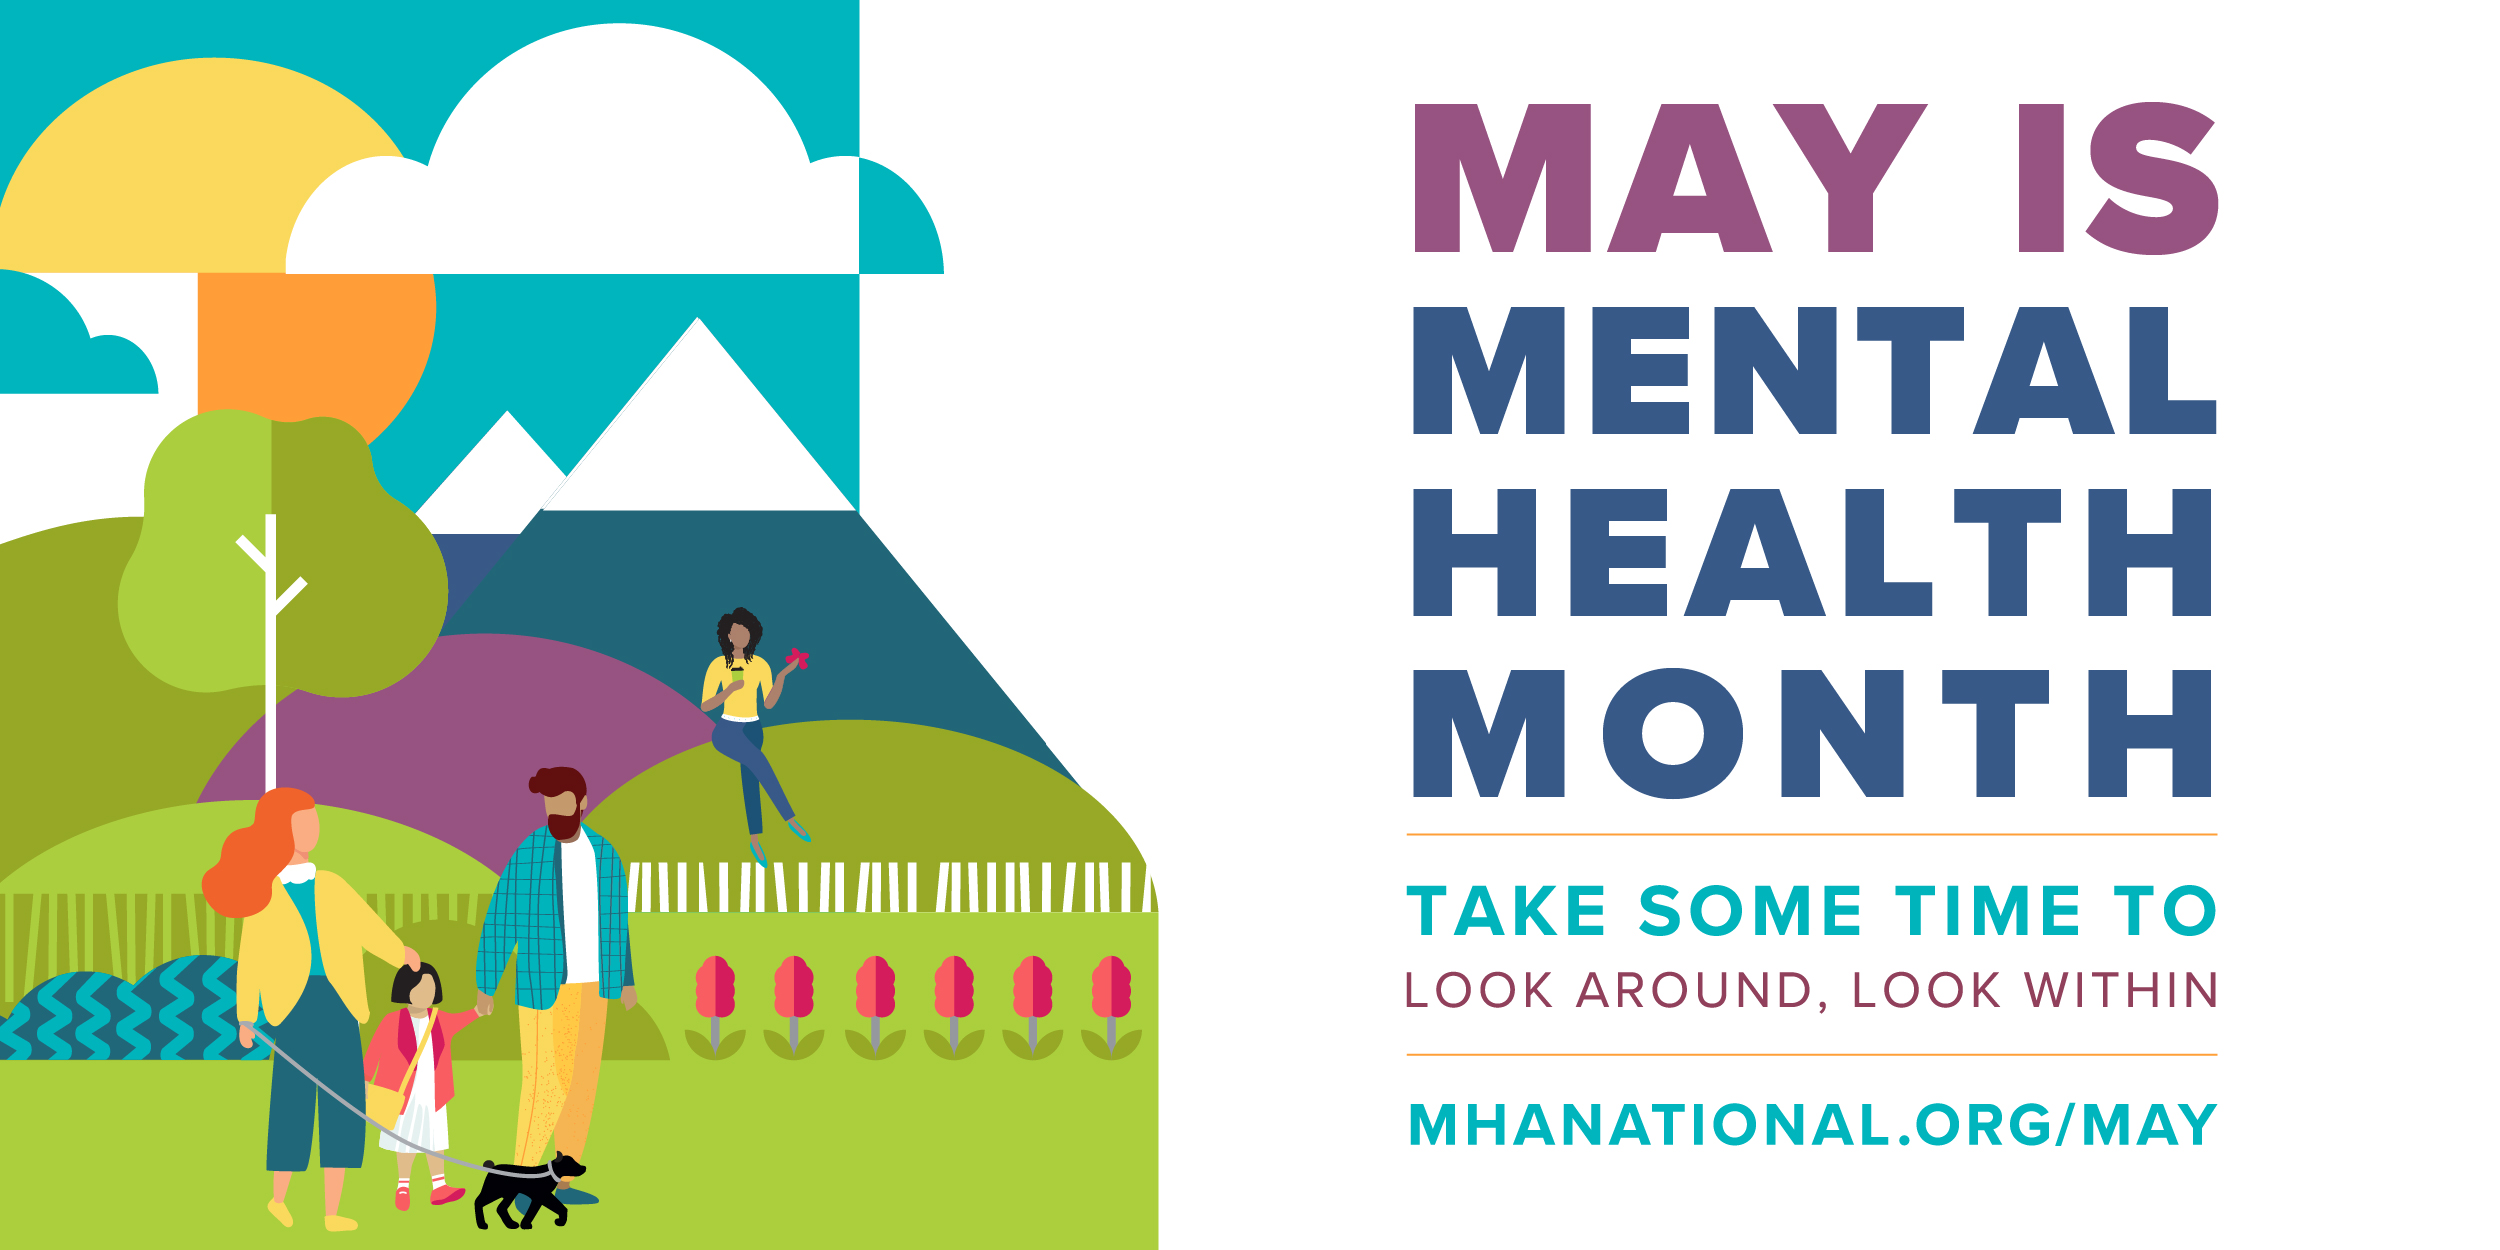 May is Mental Health Month. Illustration shows families outside.